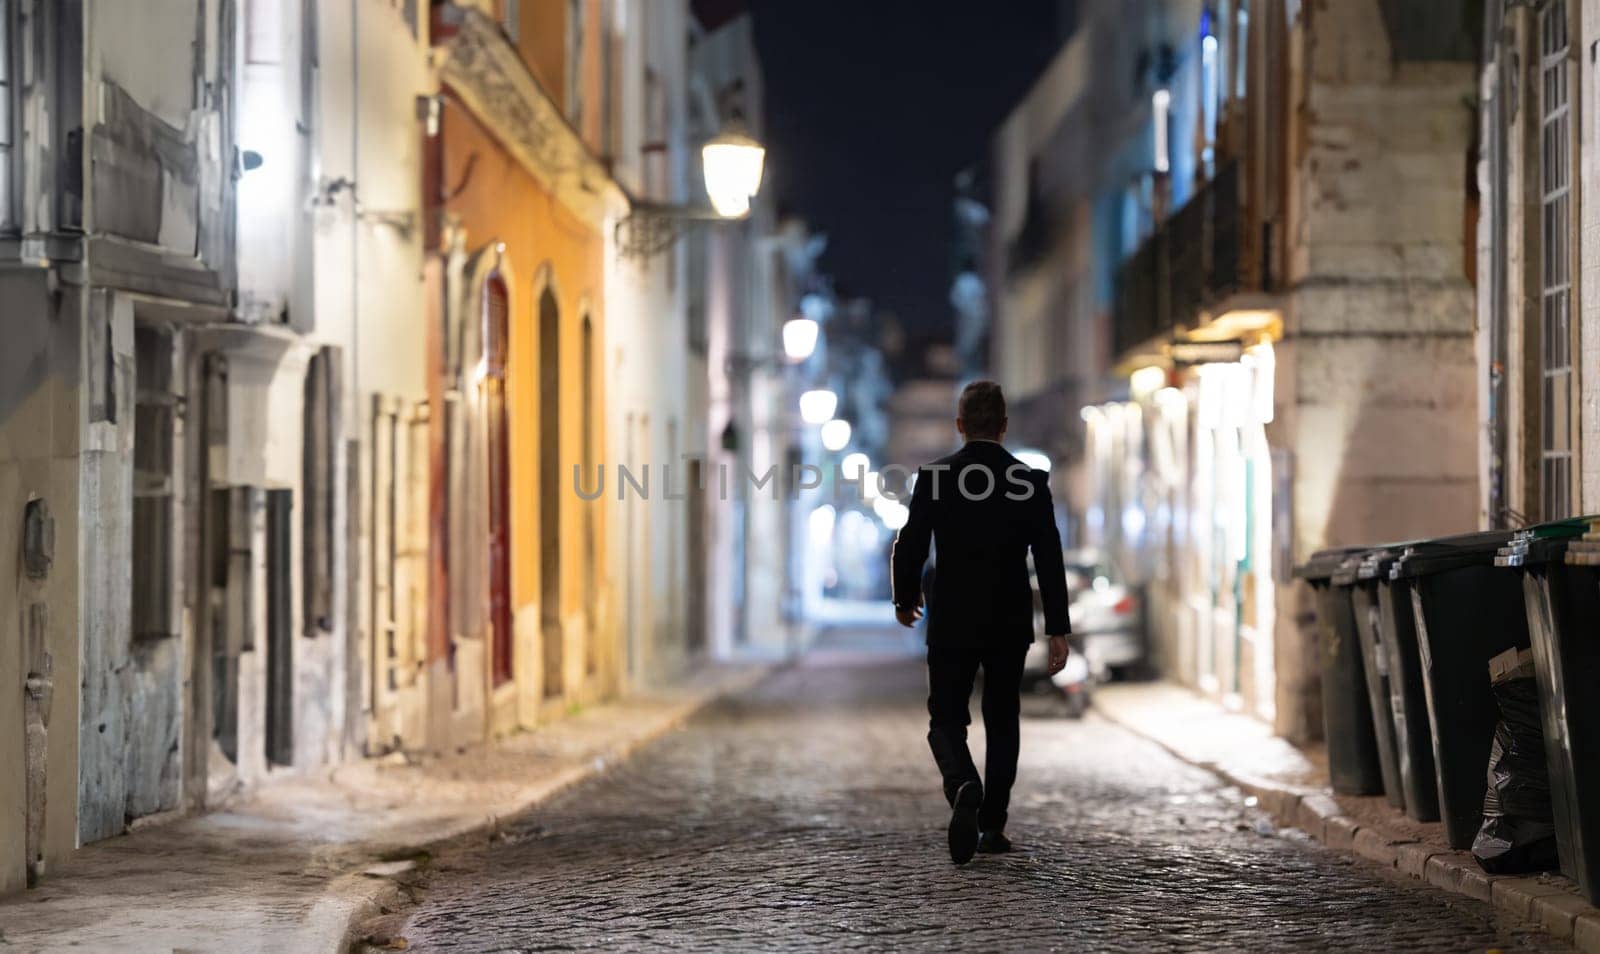 A person walking through the empty night street, lonely man